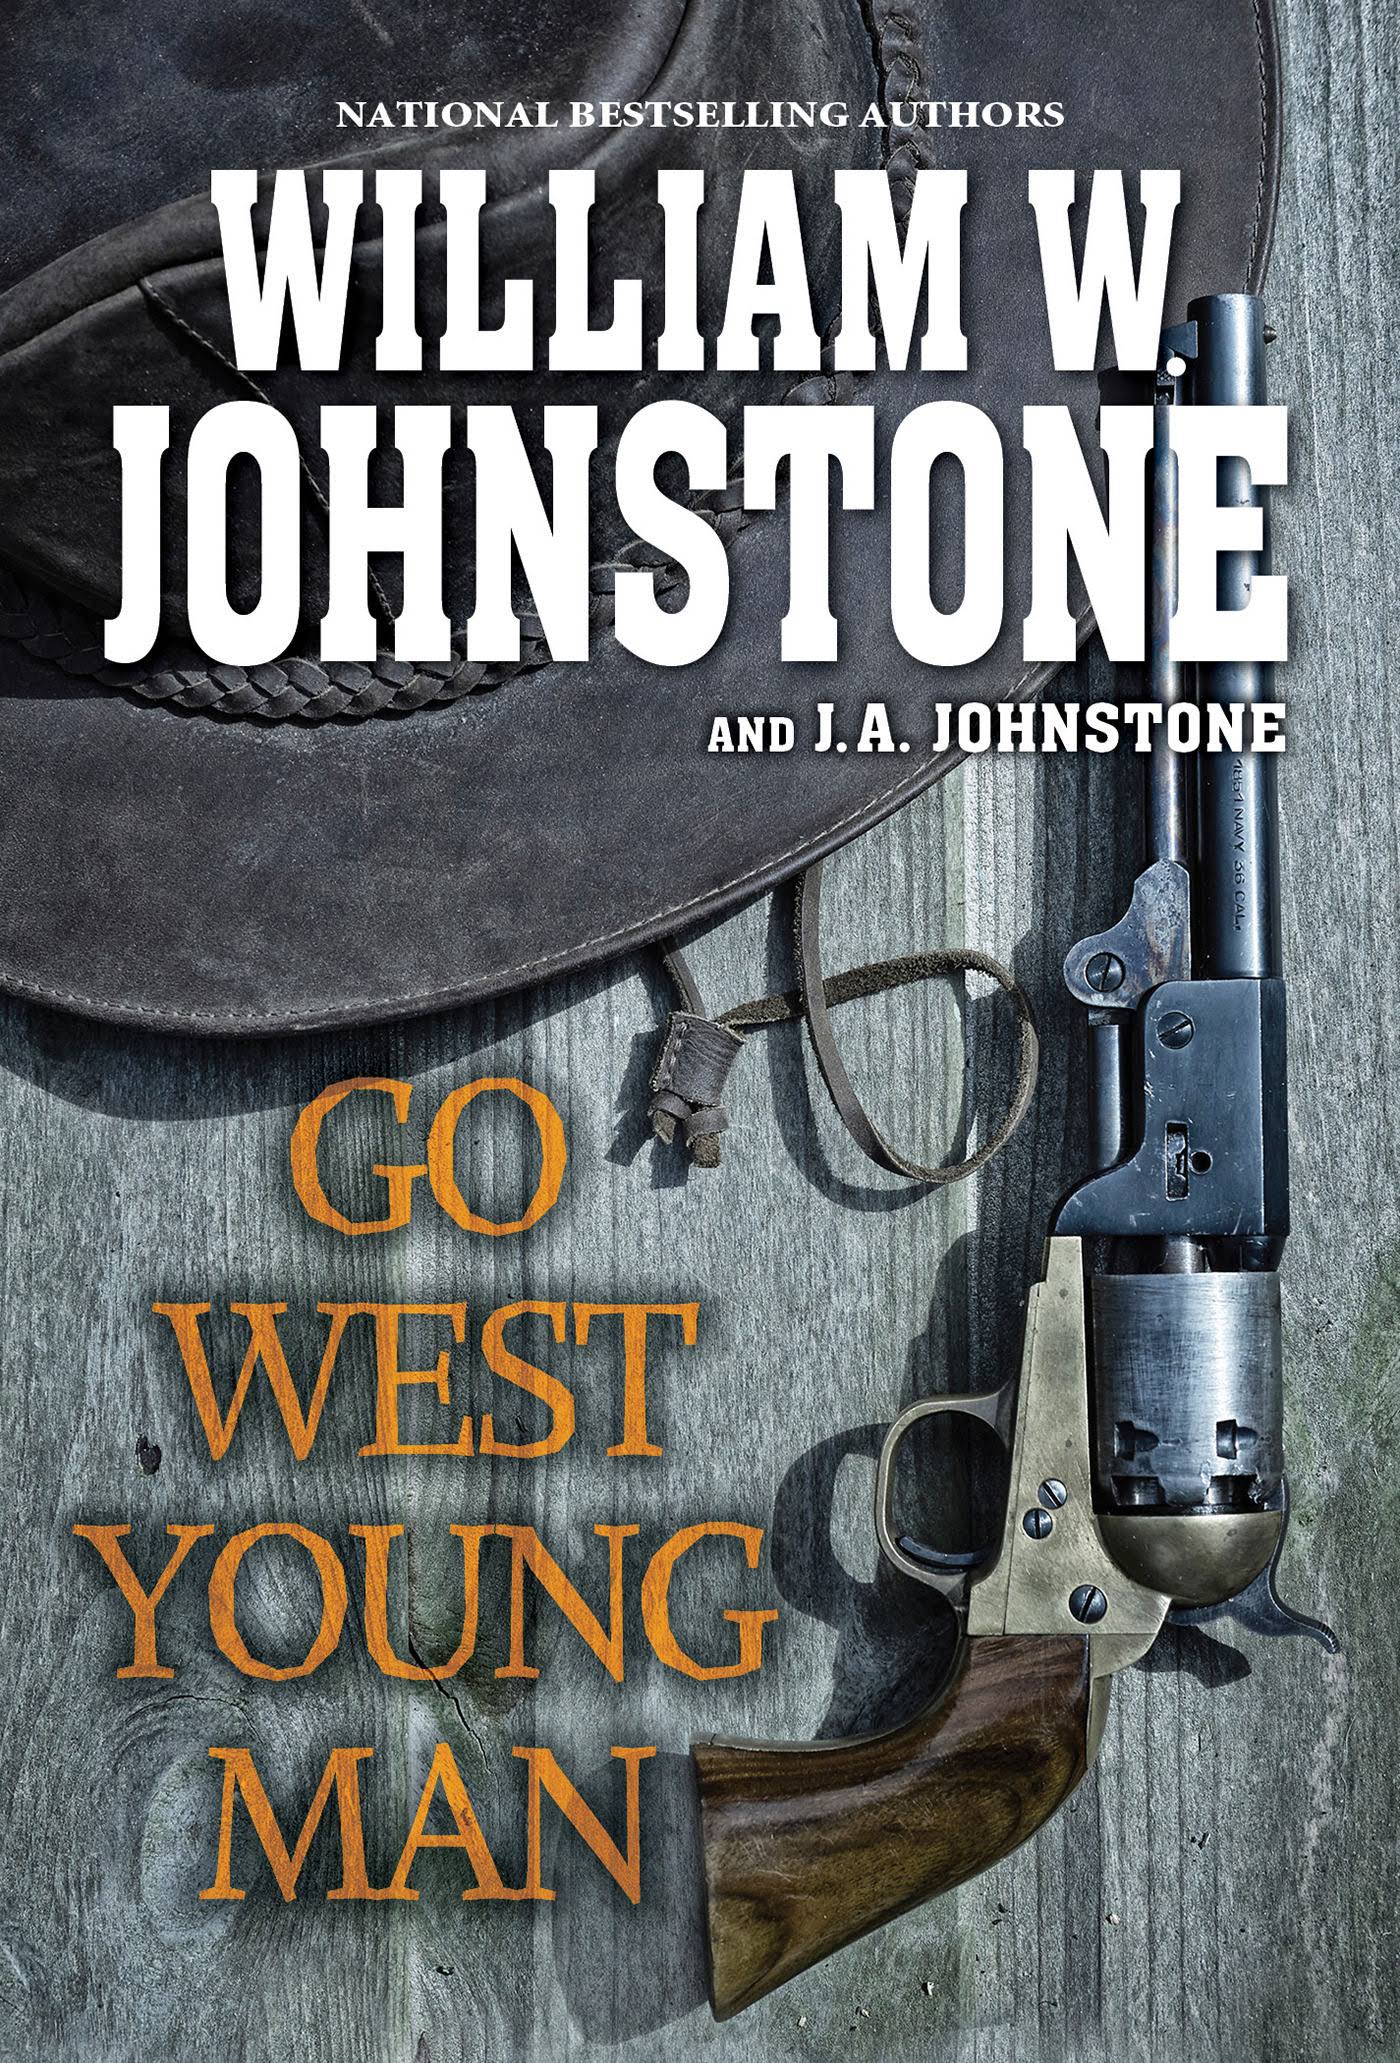 Go West, Young Man by William Johnstone